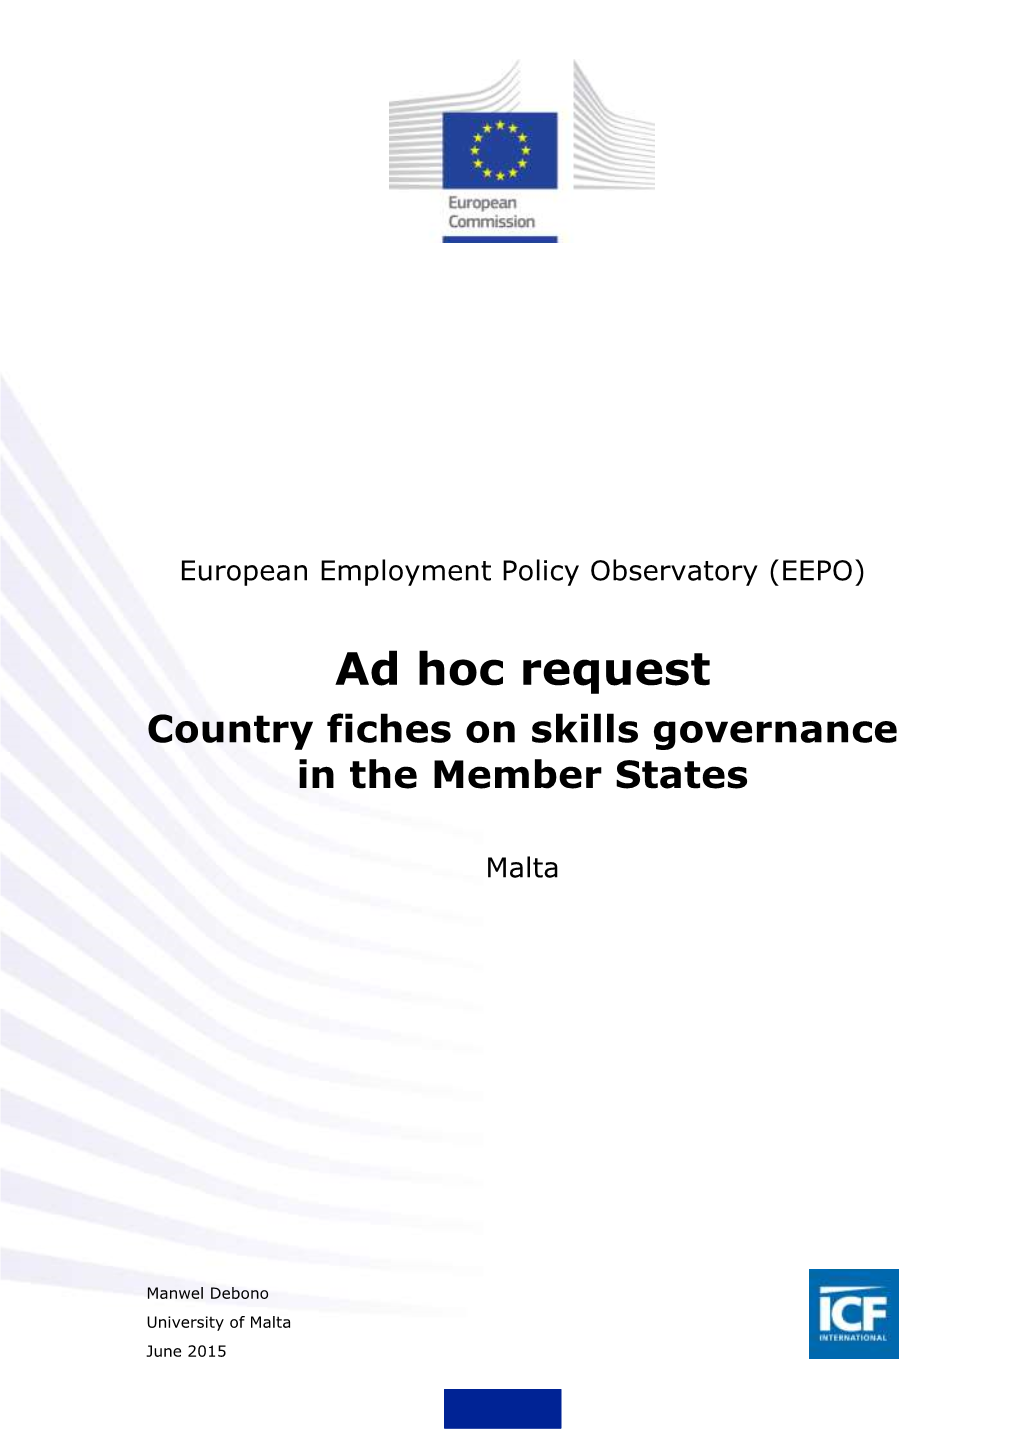 Ad Hoc Request Country Fiches on Skills Governance in the Member States